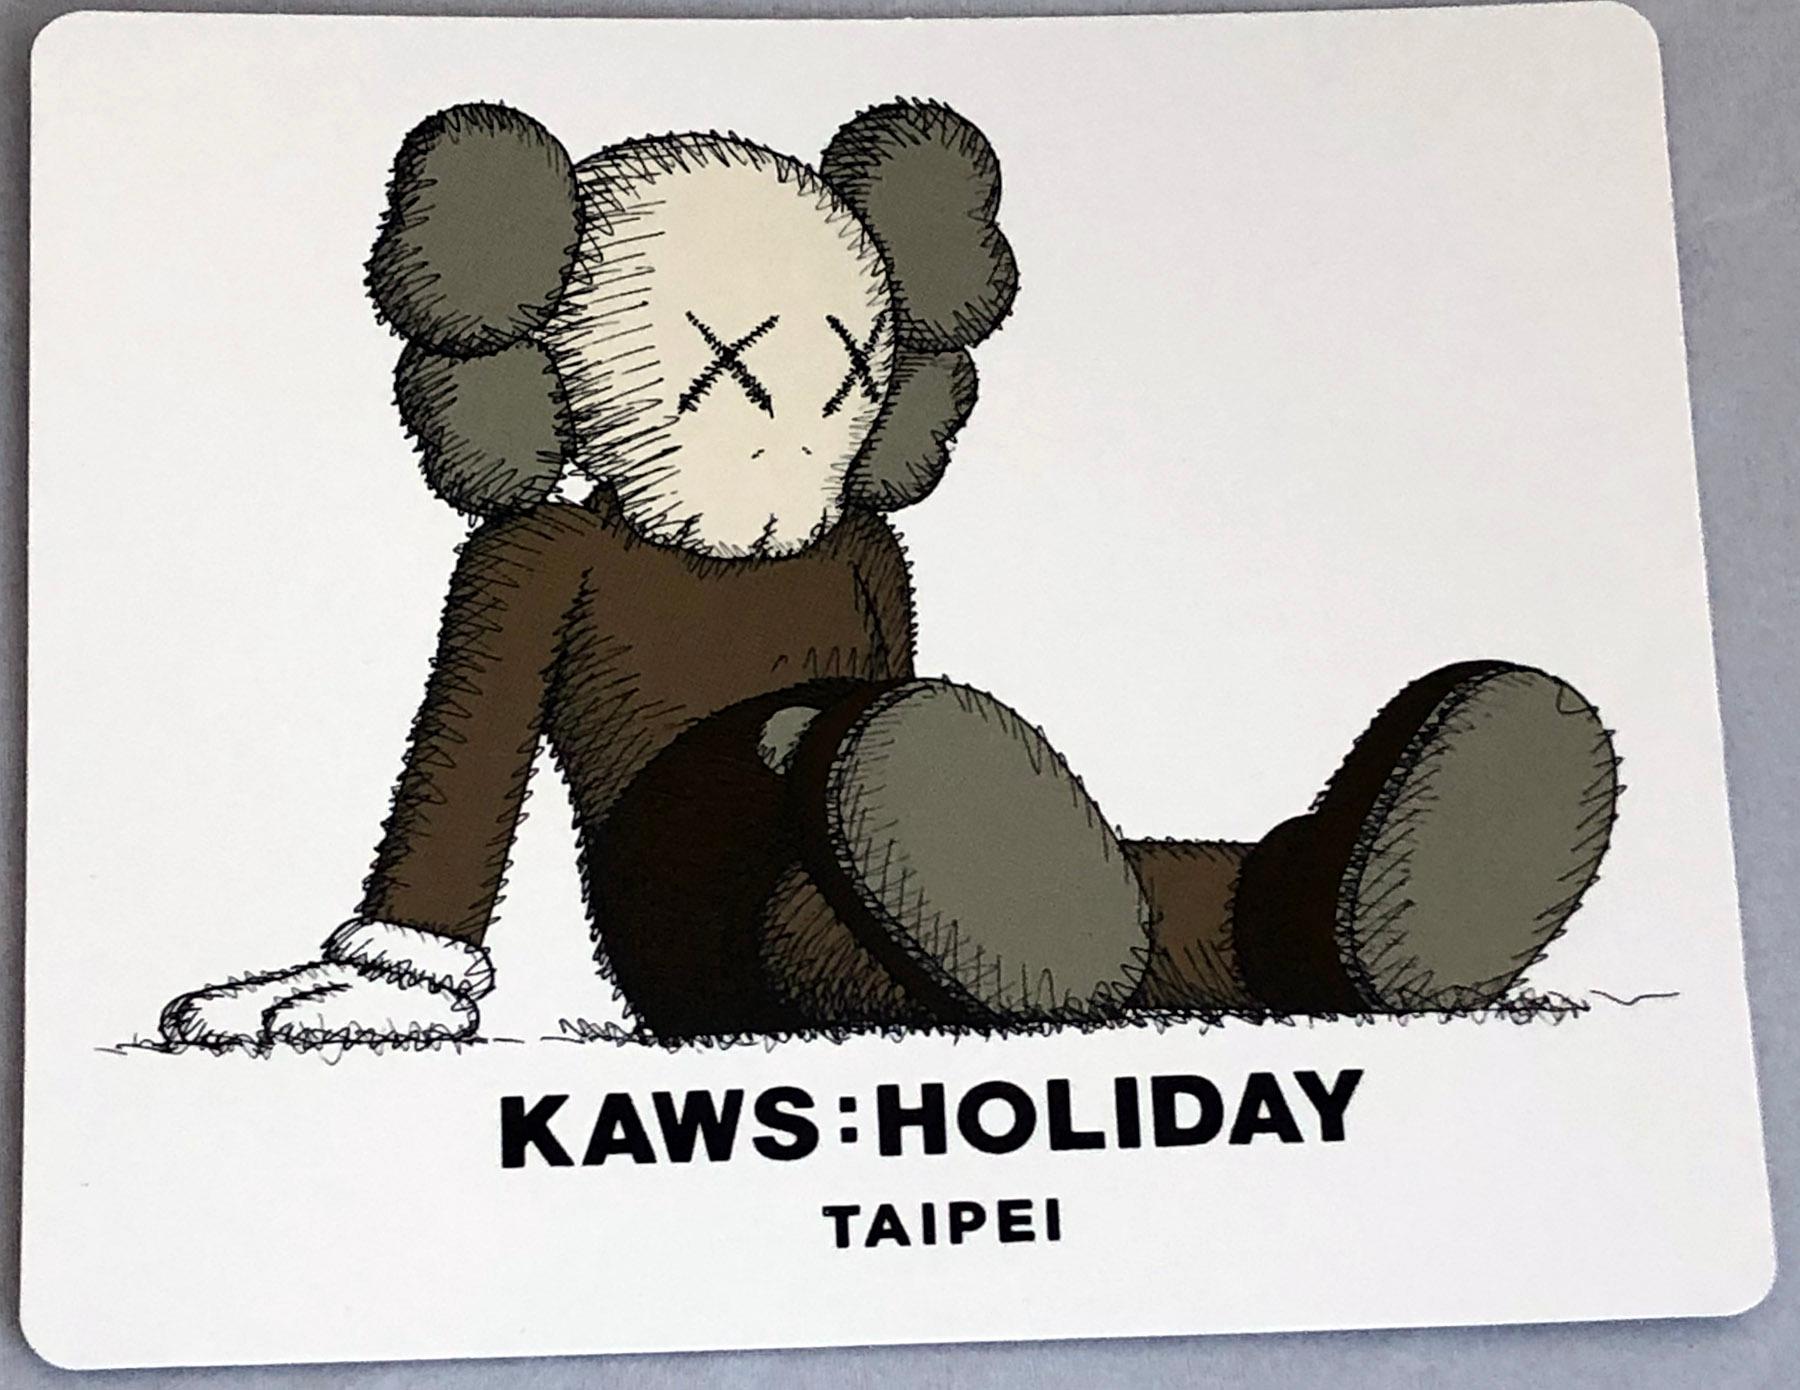 KAWS Brown Holiday Companion (KAWS Taipei): 
This figurine features KAWS' signature character COMPANION in a resting seated position. The piece was published by All Rights Reserved to commemorate the debut of KAWS’ largest sculptural endeavor to